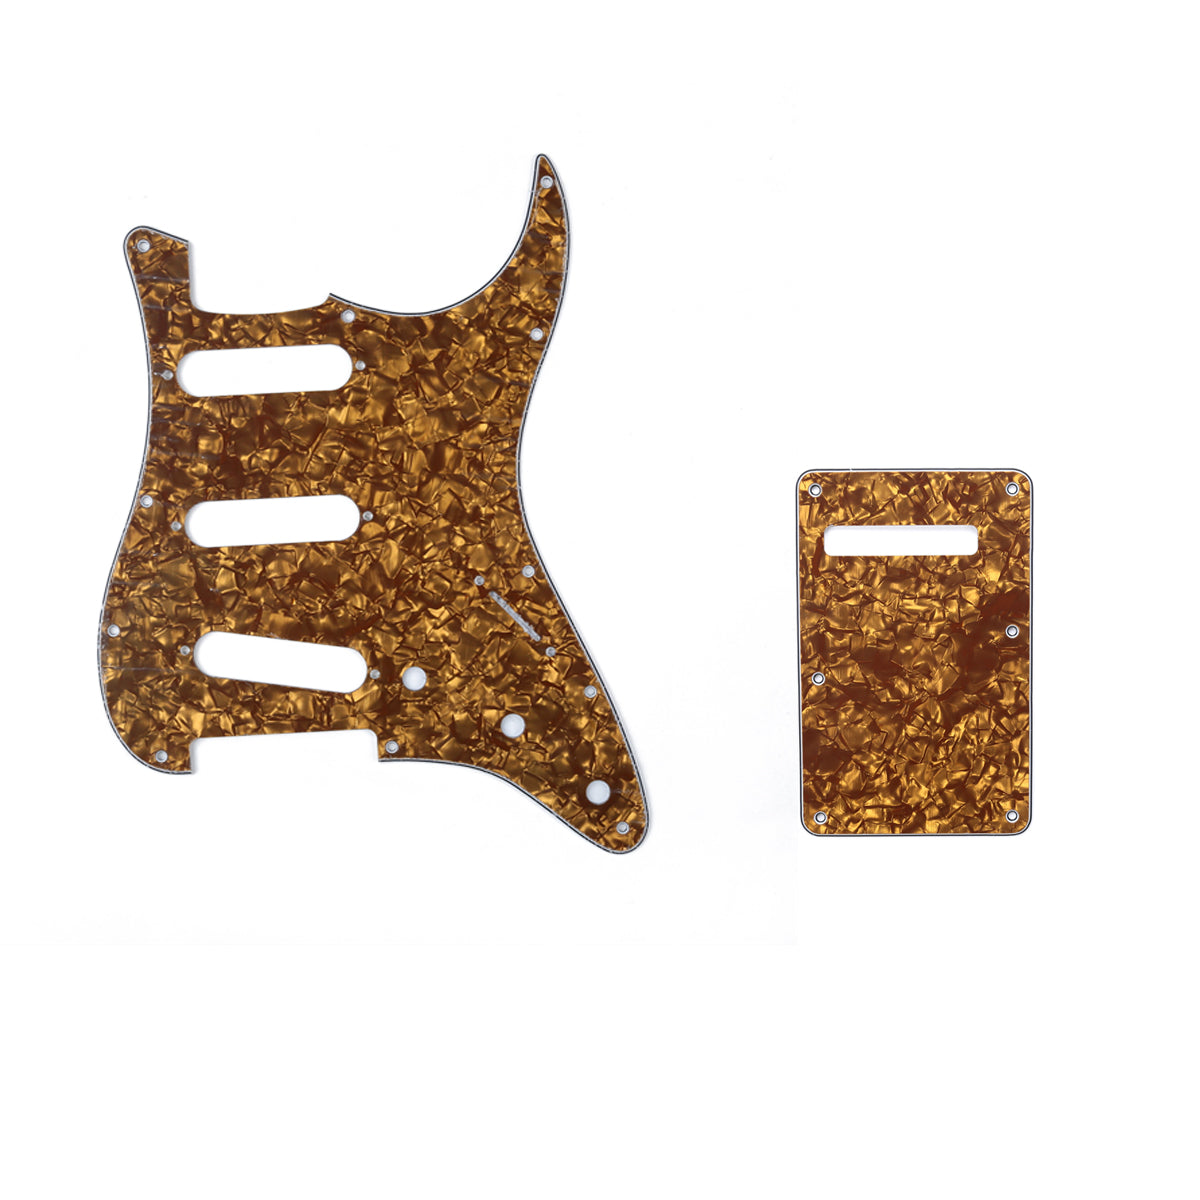 Musiclily SSS 11 Hole Strat Guitar Pickguard and BackPlate Set for Fender USA/Mexican Standard Stratocaster Modern Style, 4Ply Bronze Pearl